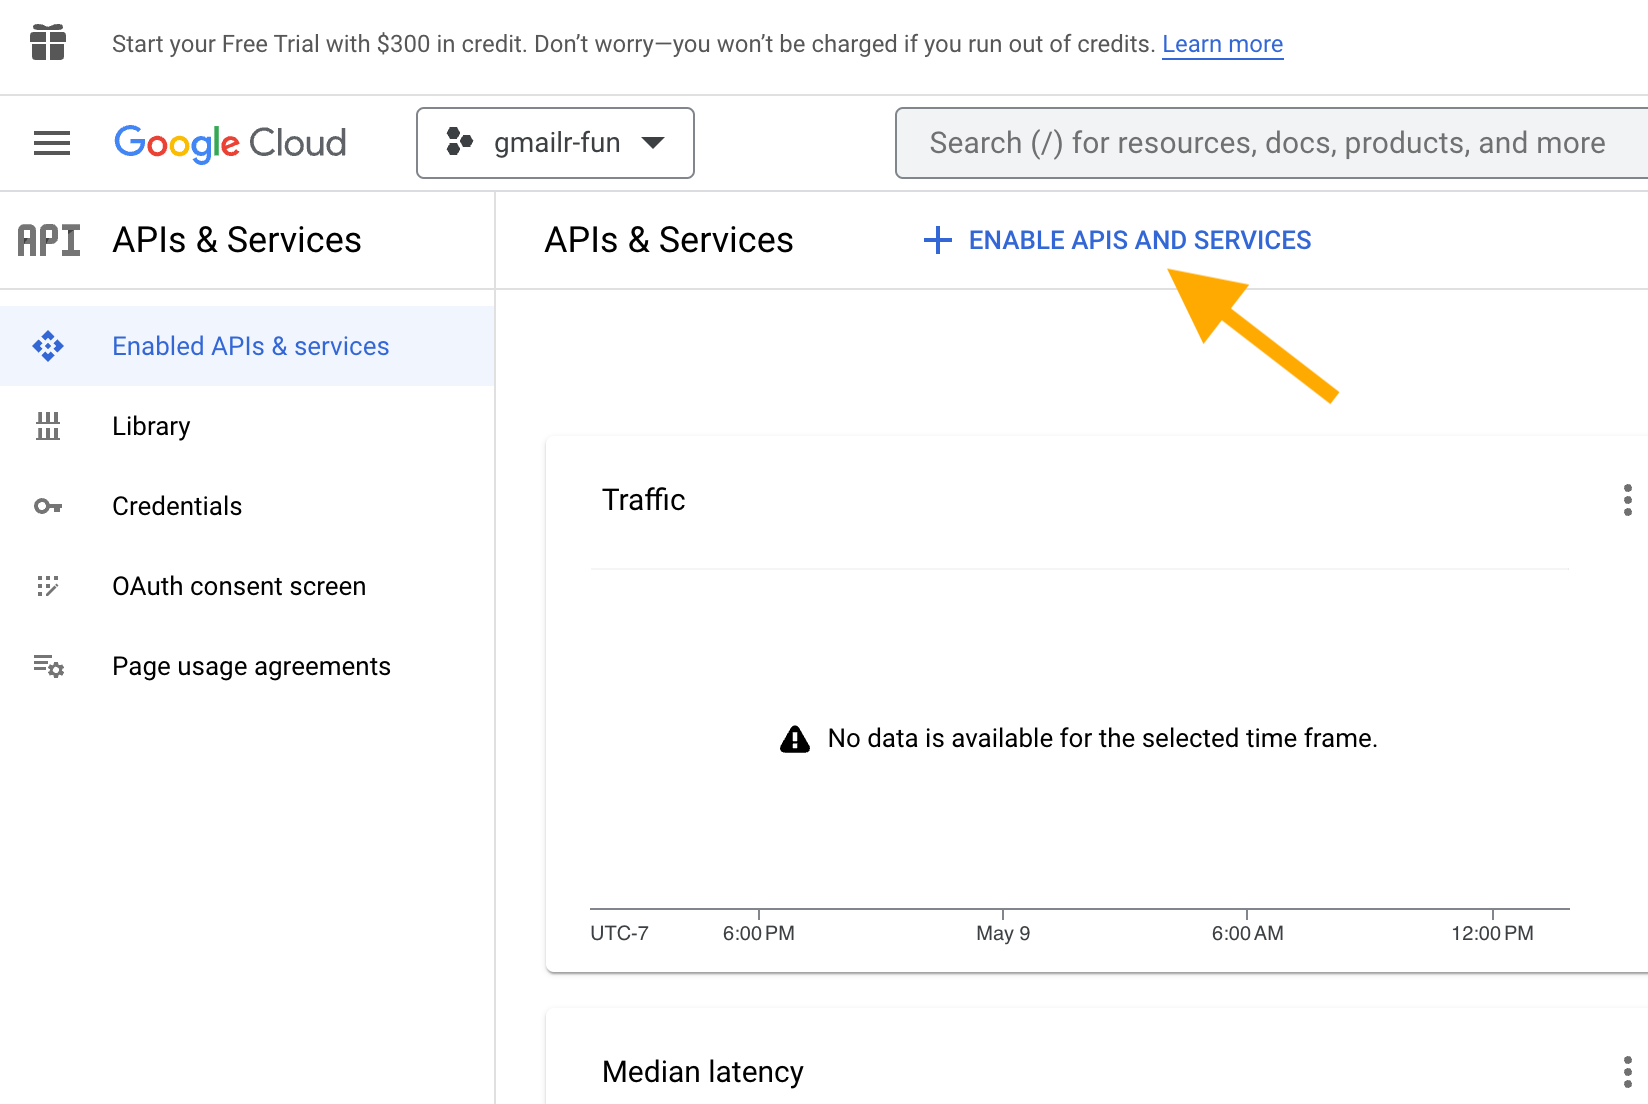 Screenshot with an arrows pointing at the "+ ENABLE APIS AND SERVICES" button.